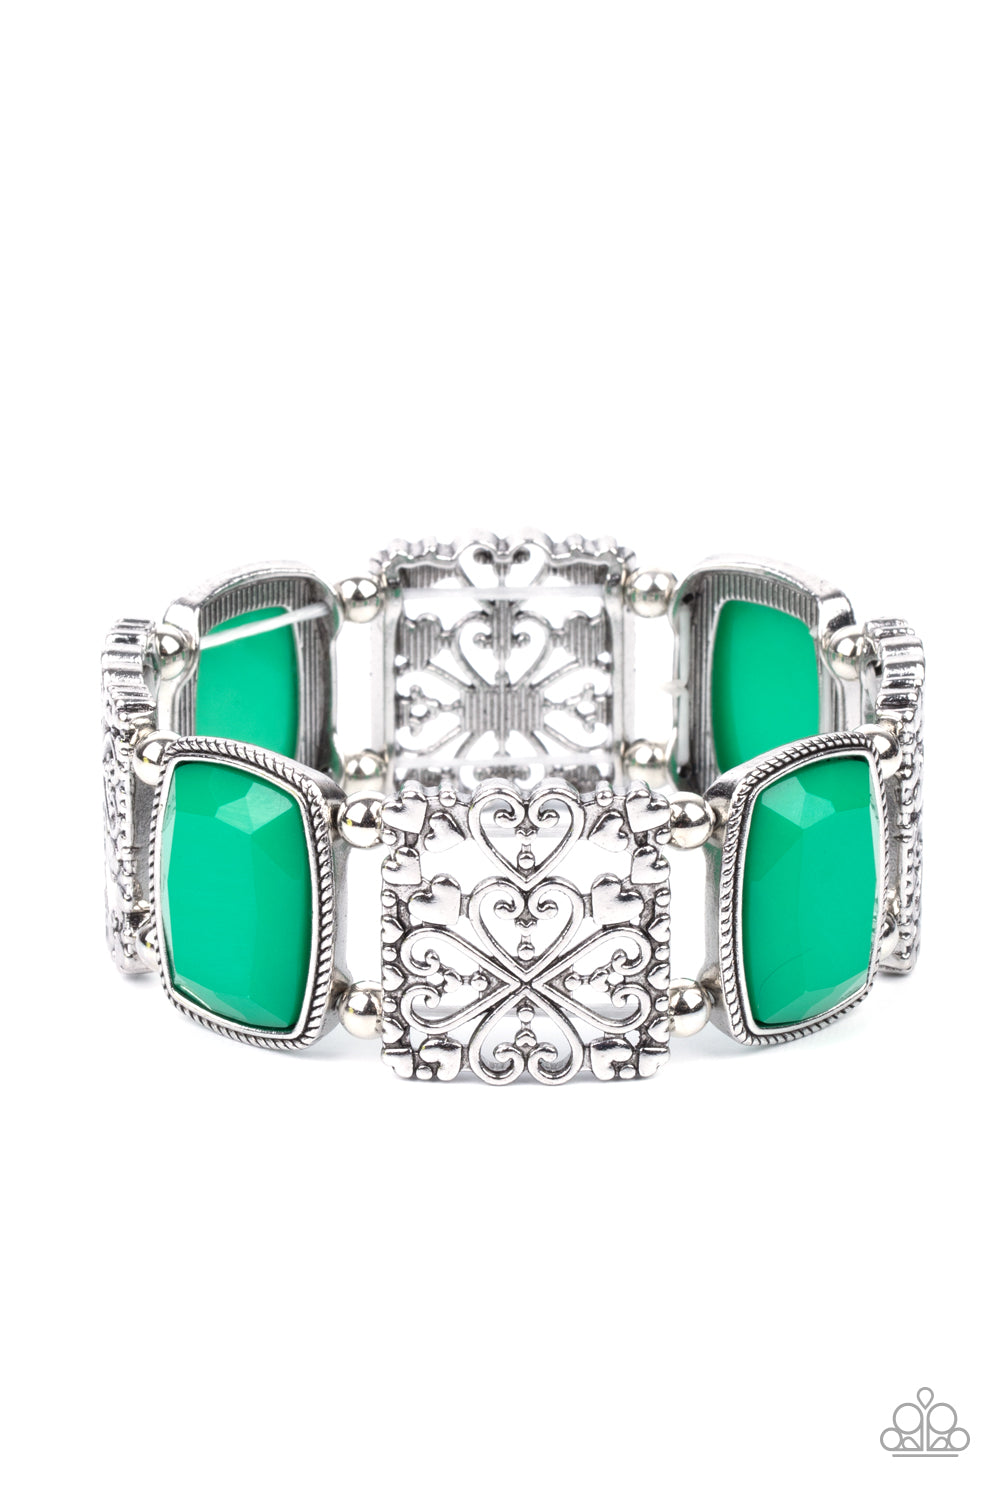 Infused with dainty silver heart accents, whimsically filled silver filigree frames and faceted Mint beads are threaded along stretchy bands around the wrist for a colorful flair.